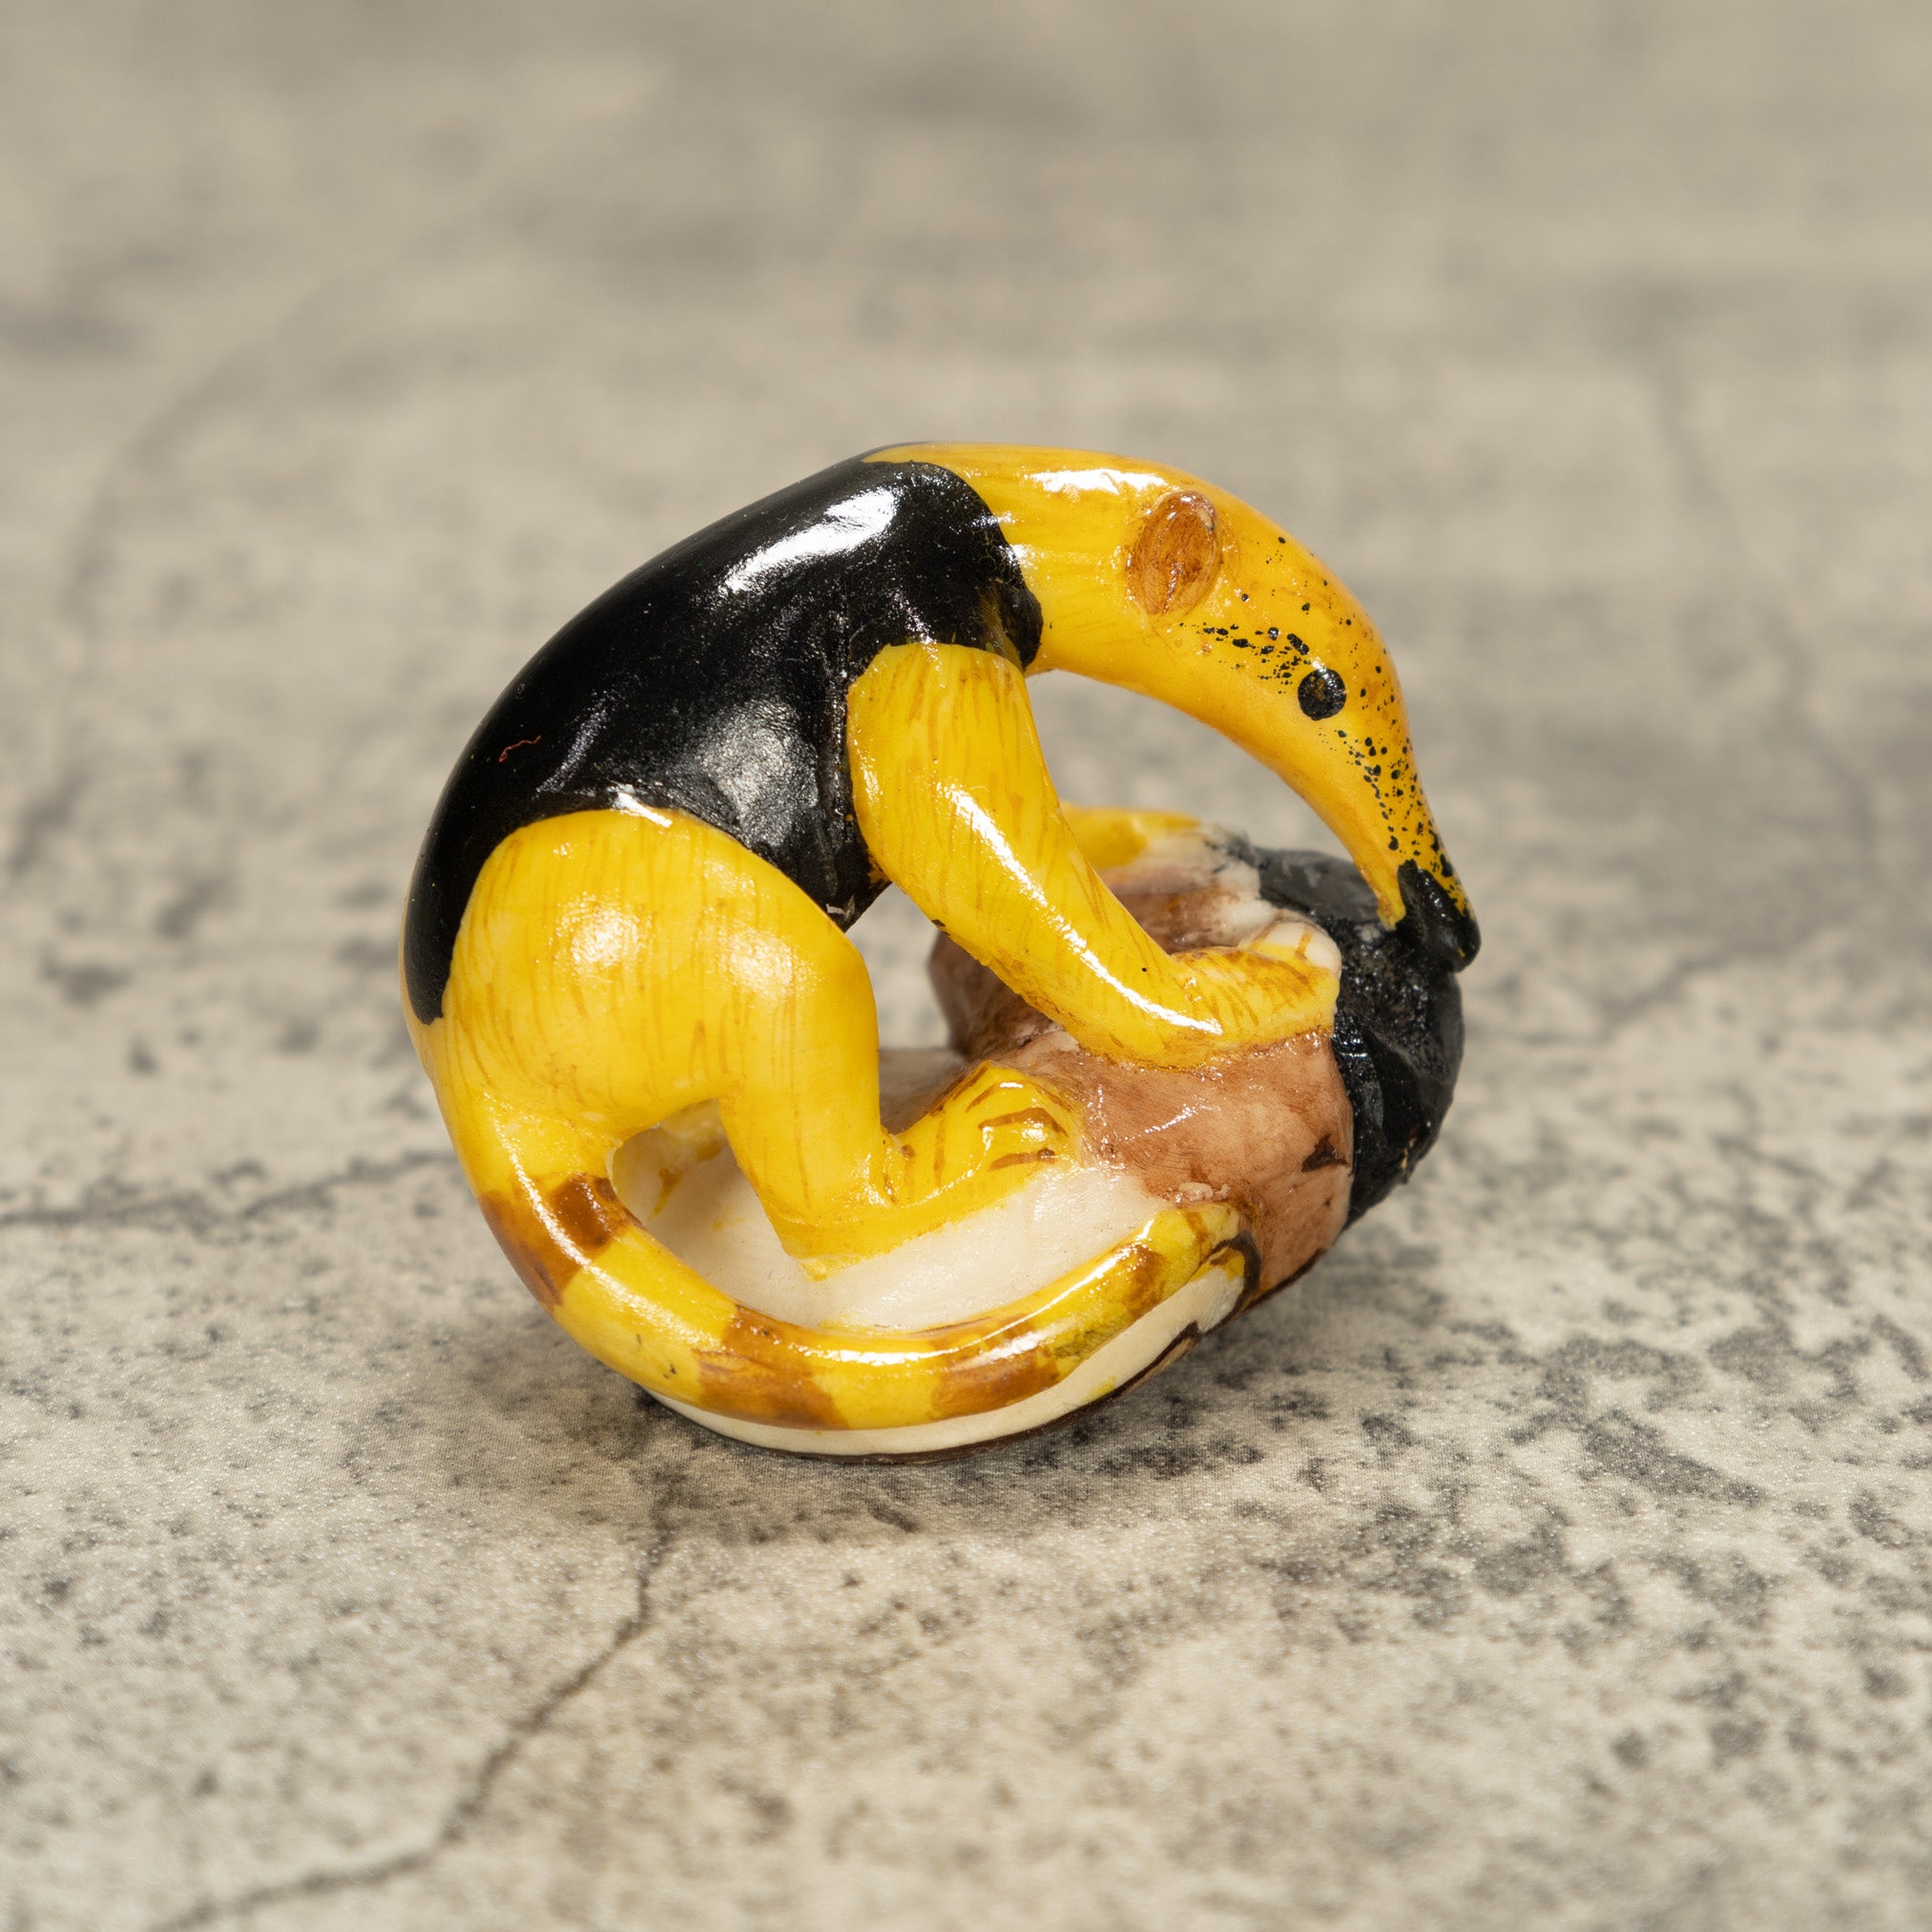 Anteater With Red Tongue Tagua Nut Carving